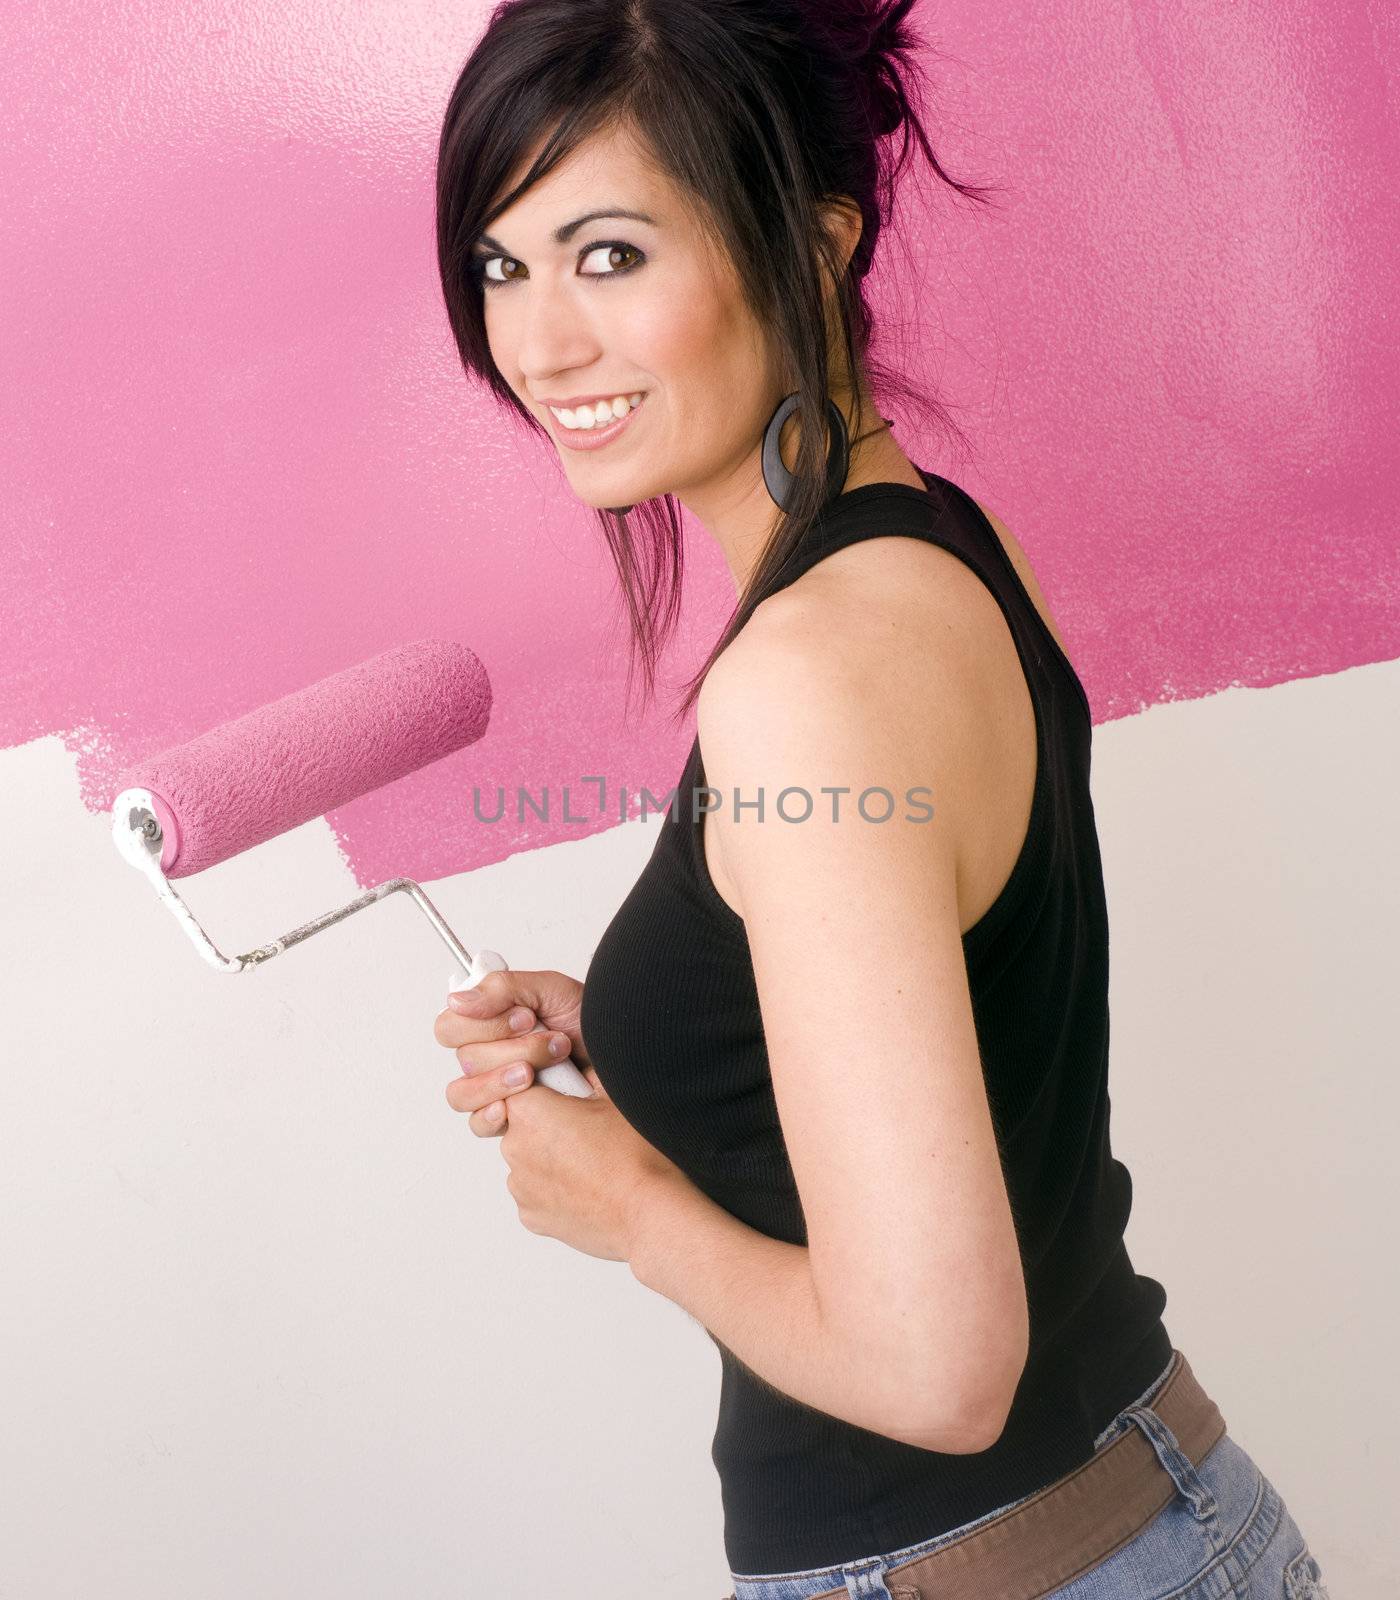 A brunette woman paints the wall of her apartment